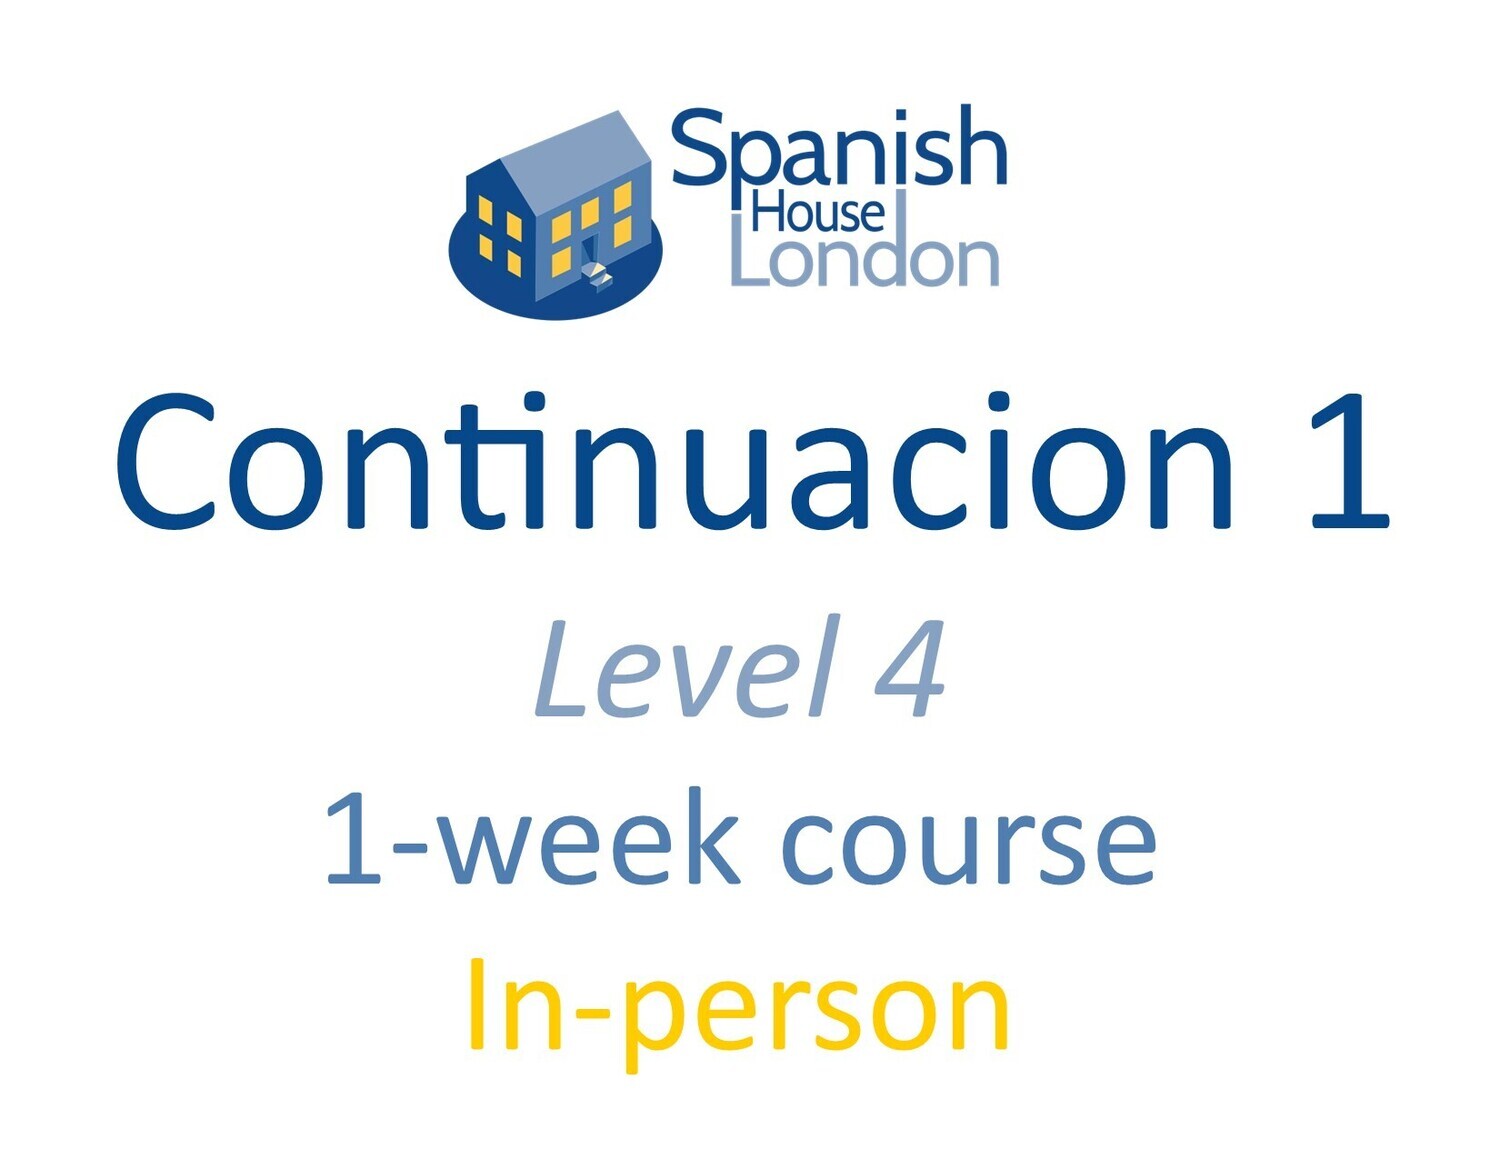 One-Week Intensive Continuacion 1 Course starting on 5th December at 10.30am in Clapham North